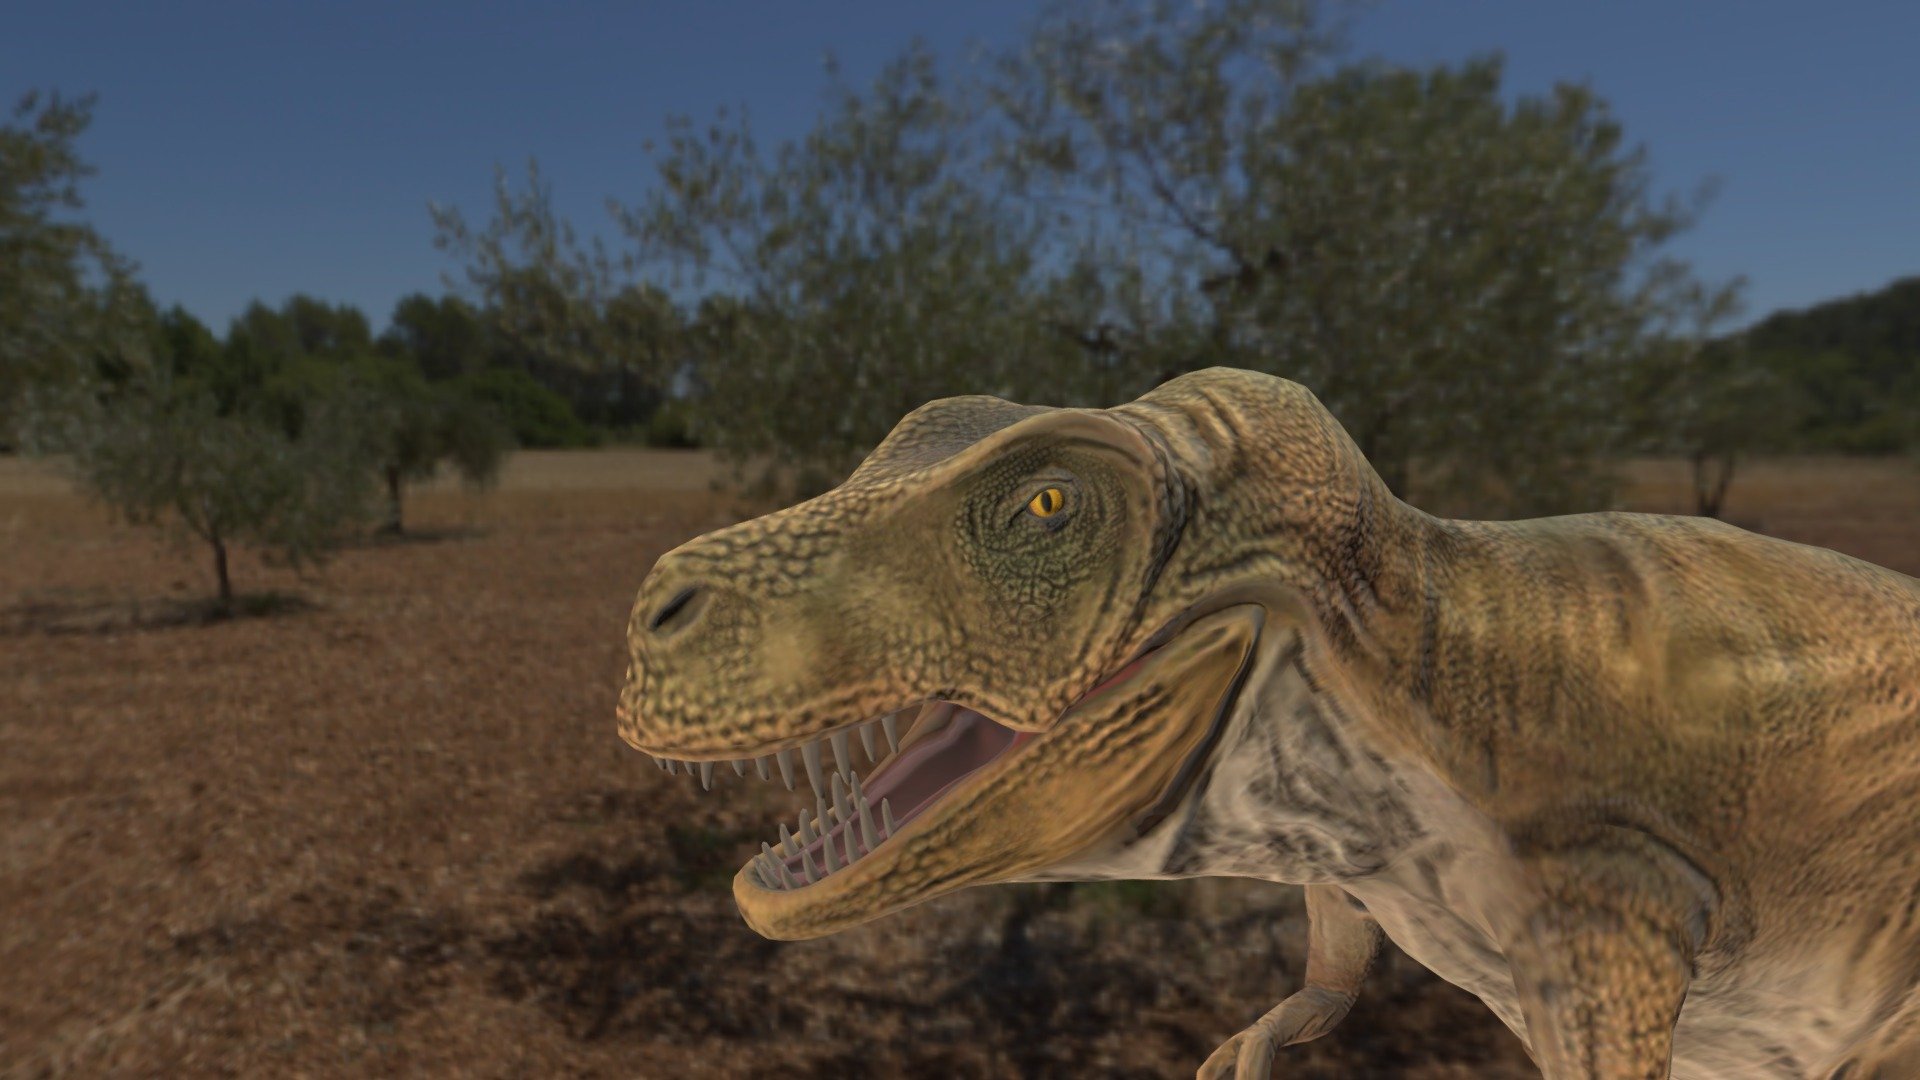 Growing Up Tyrannosaurus Rex: Researchers Learn More About Teen